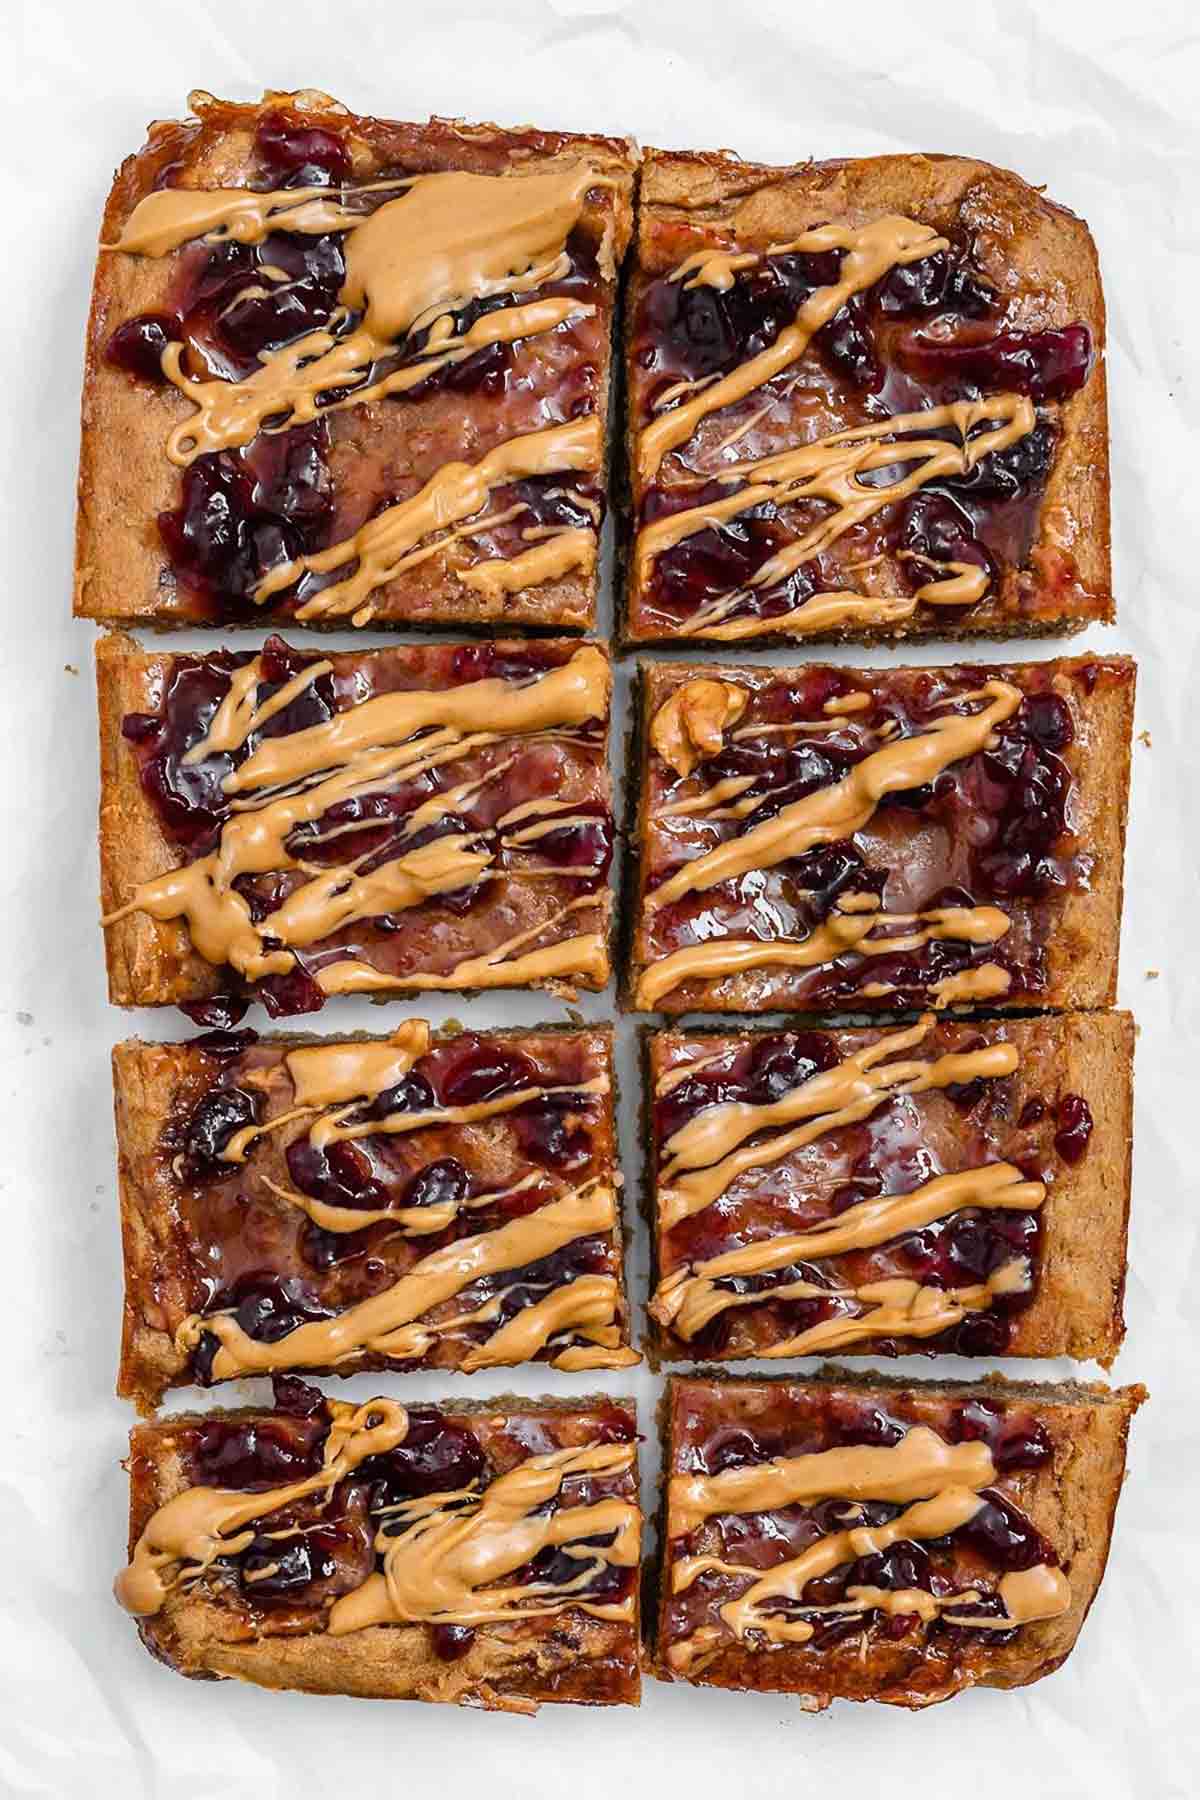 Peanut Butter And Jelly Blondie Bars